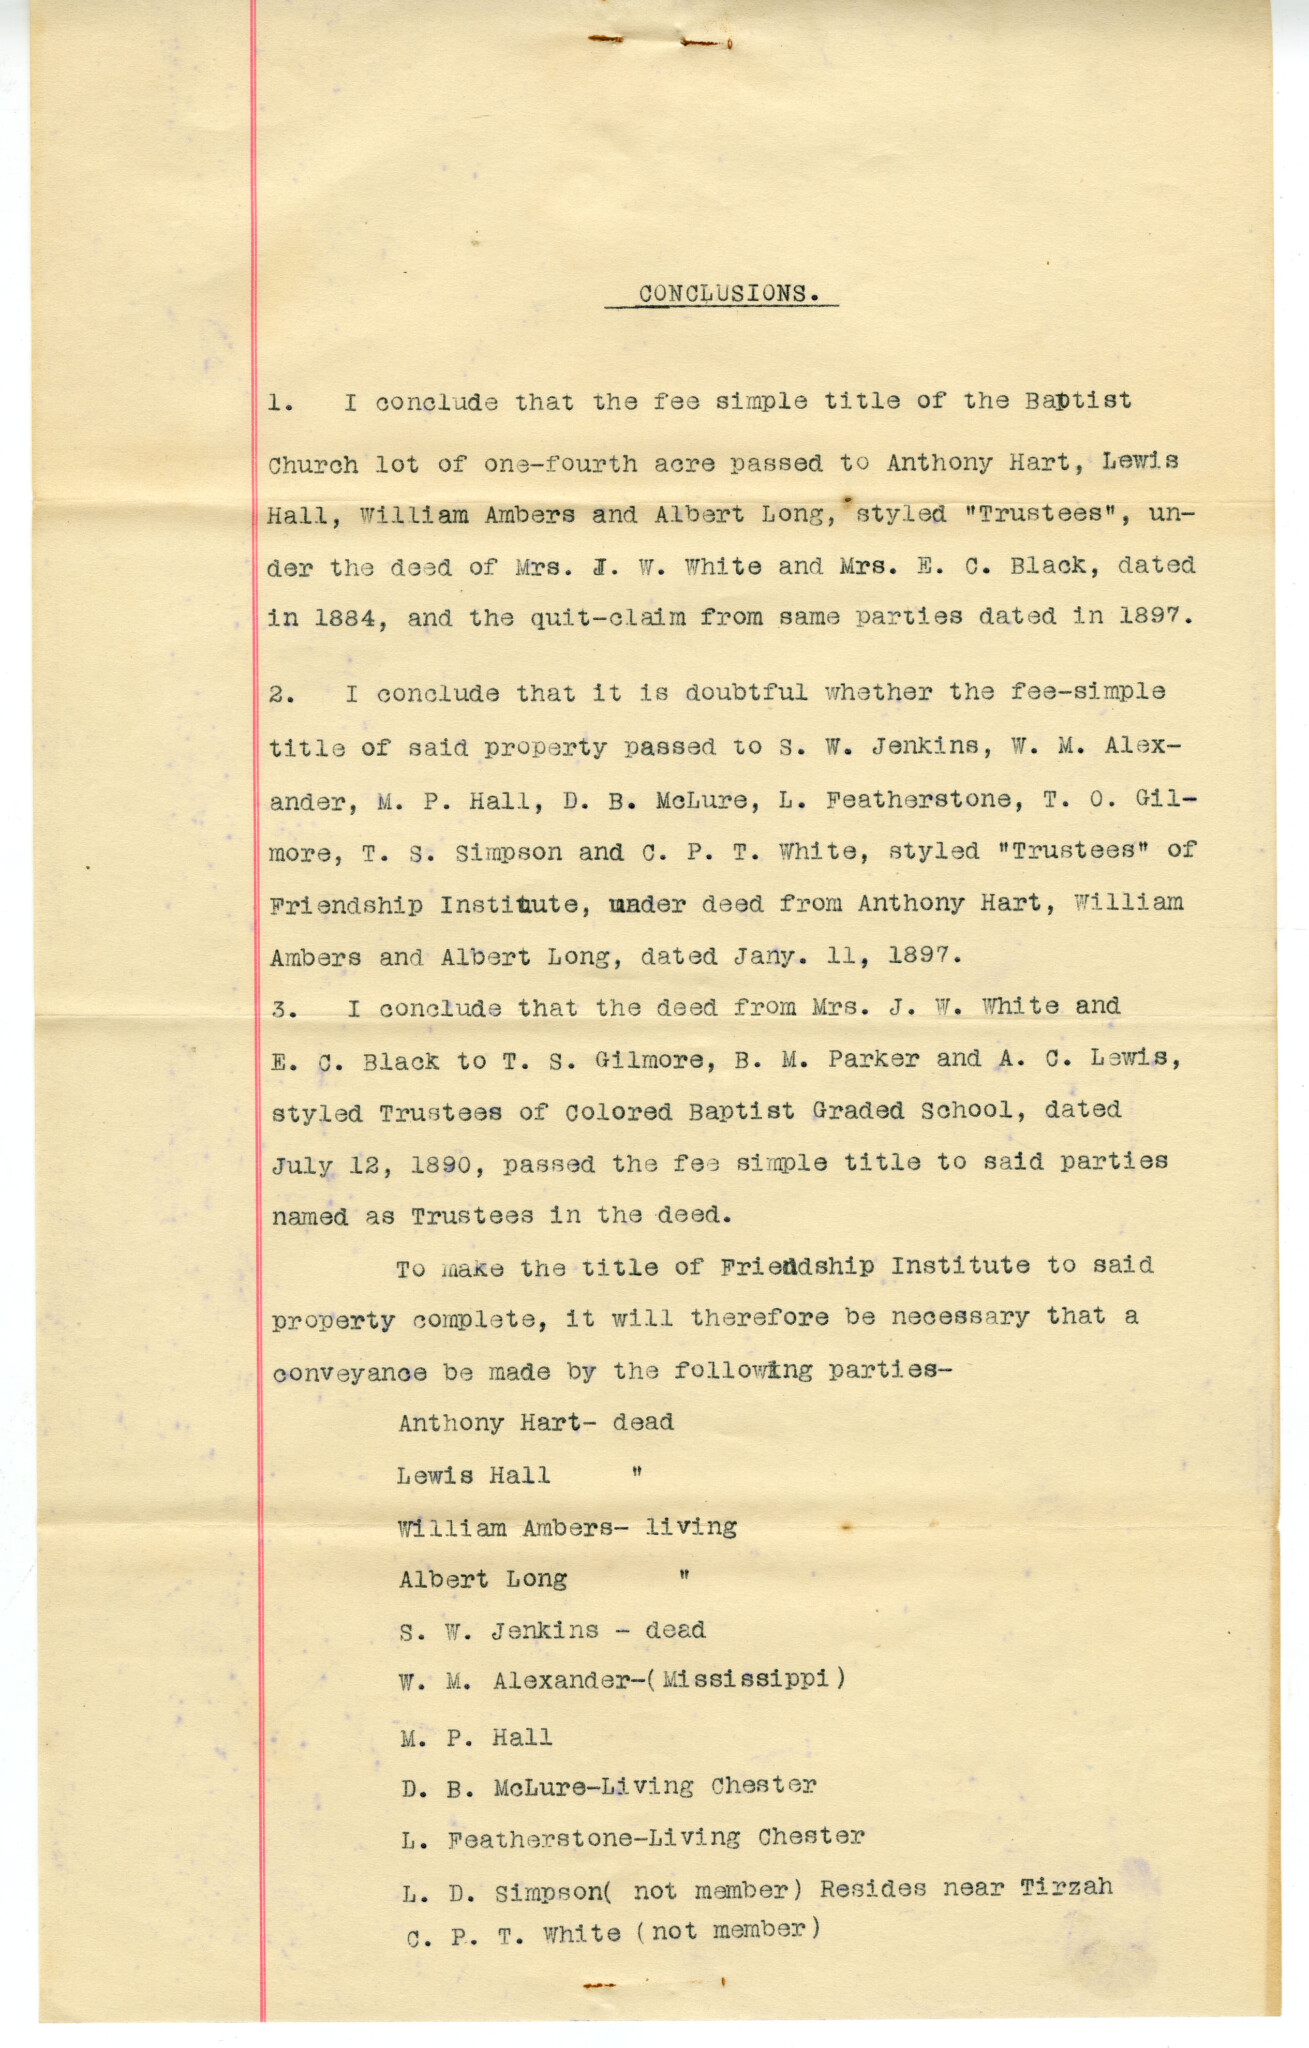 Legal documents related to Friendship College - WU Pettus Archives, p. 2